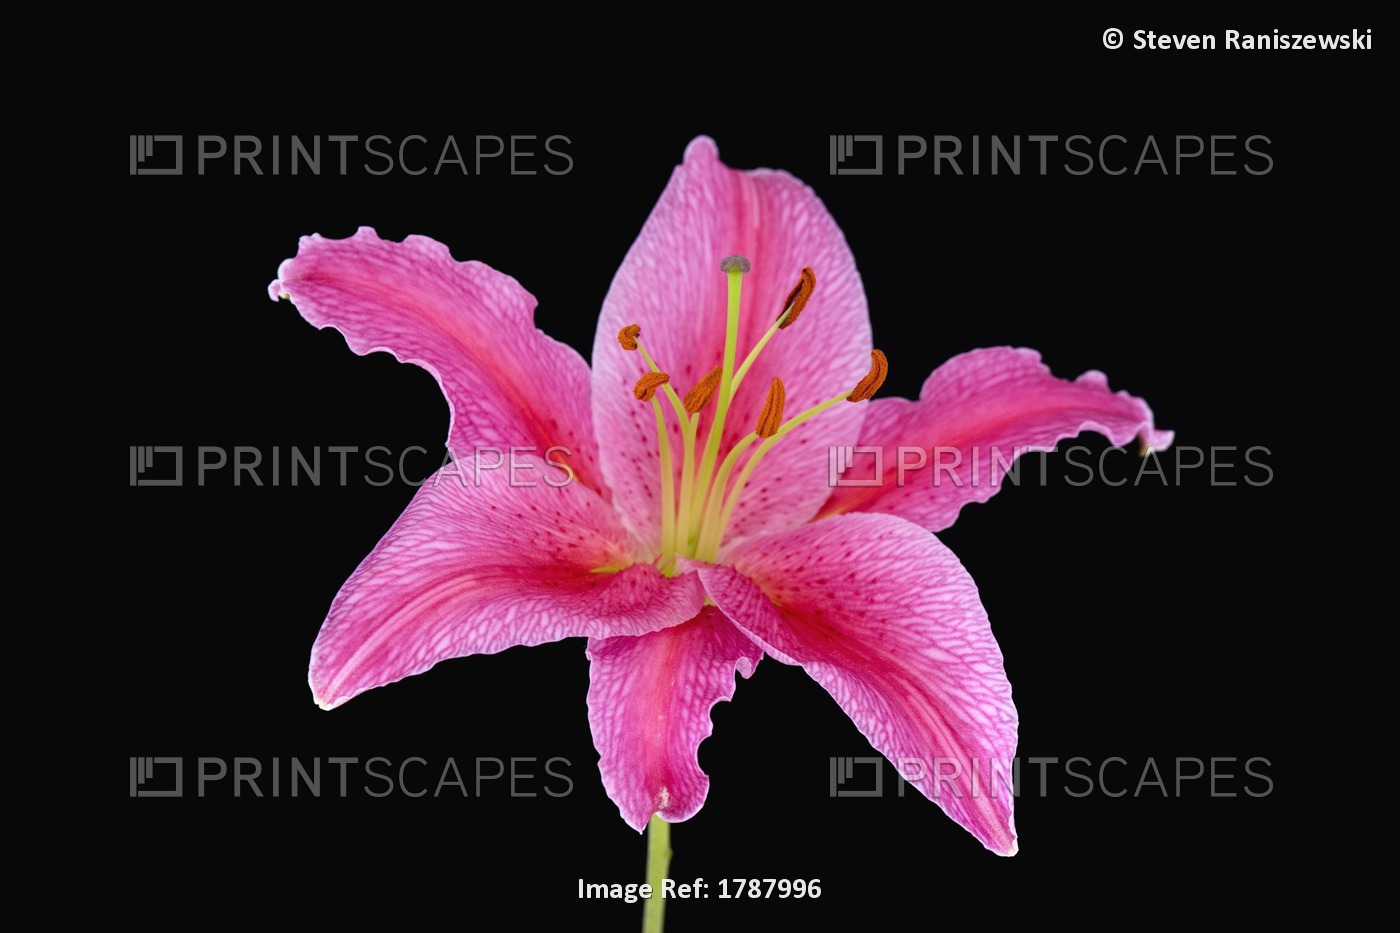 Pink Lily Against Black Background